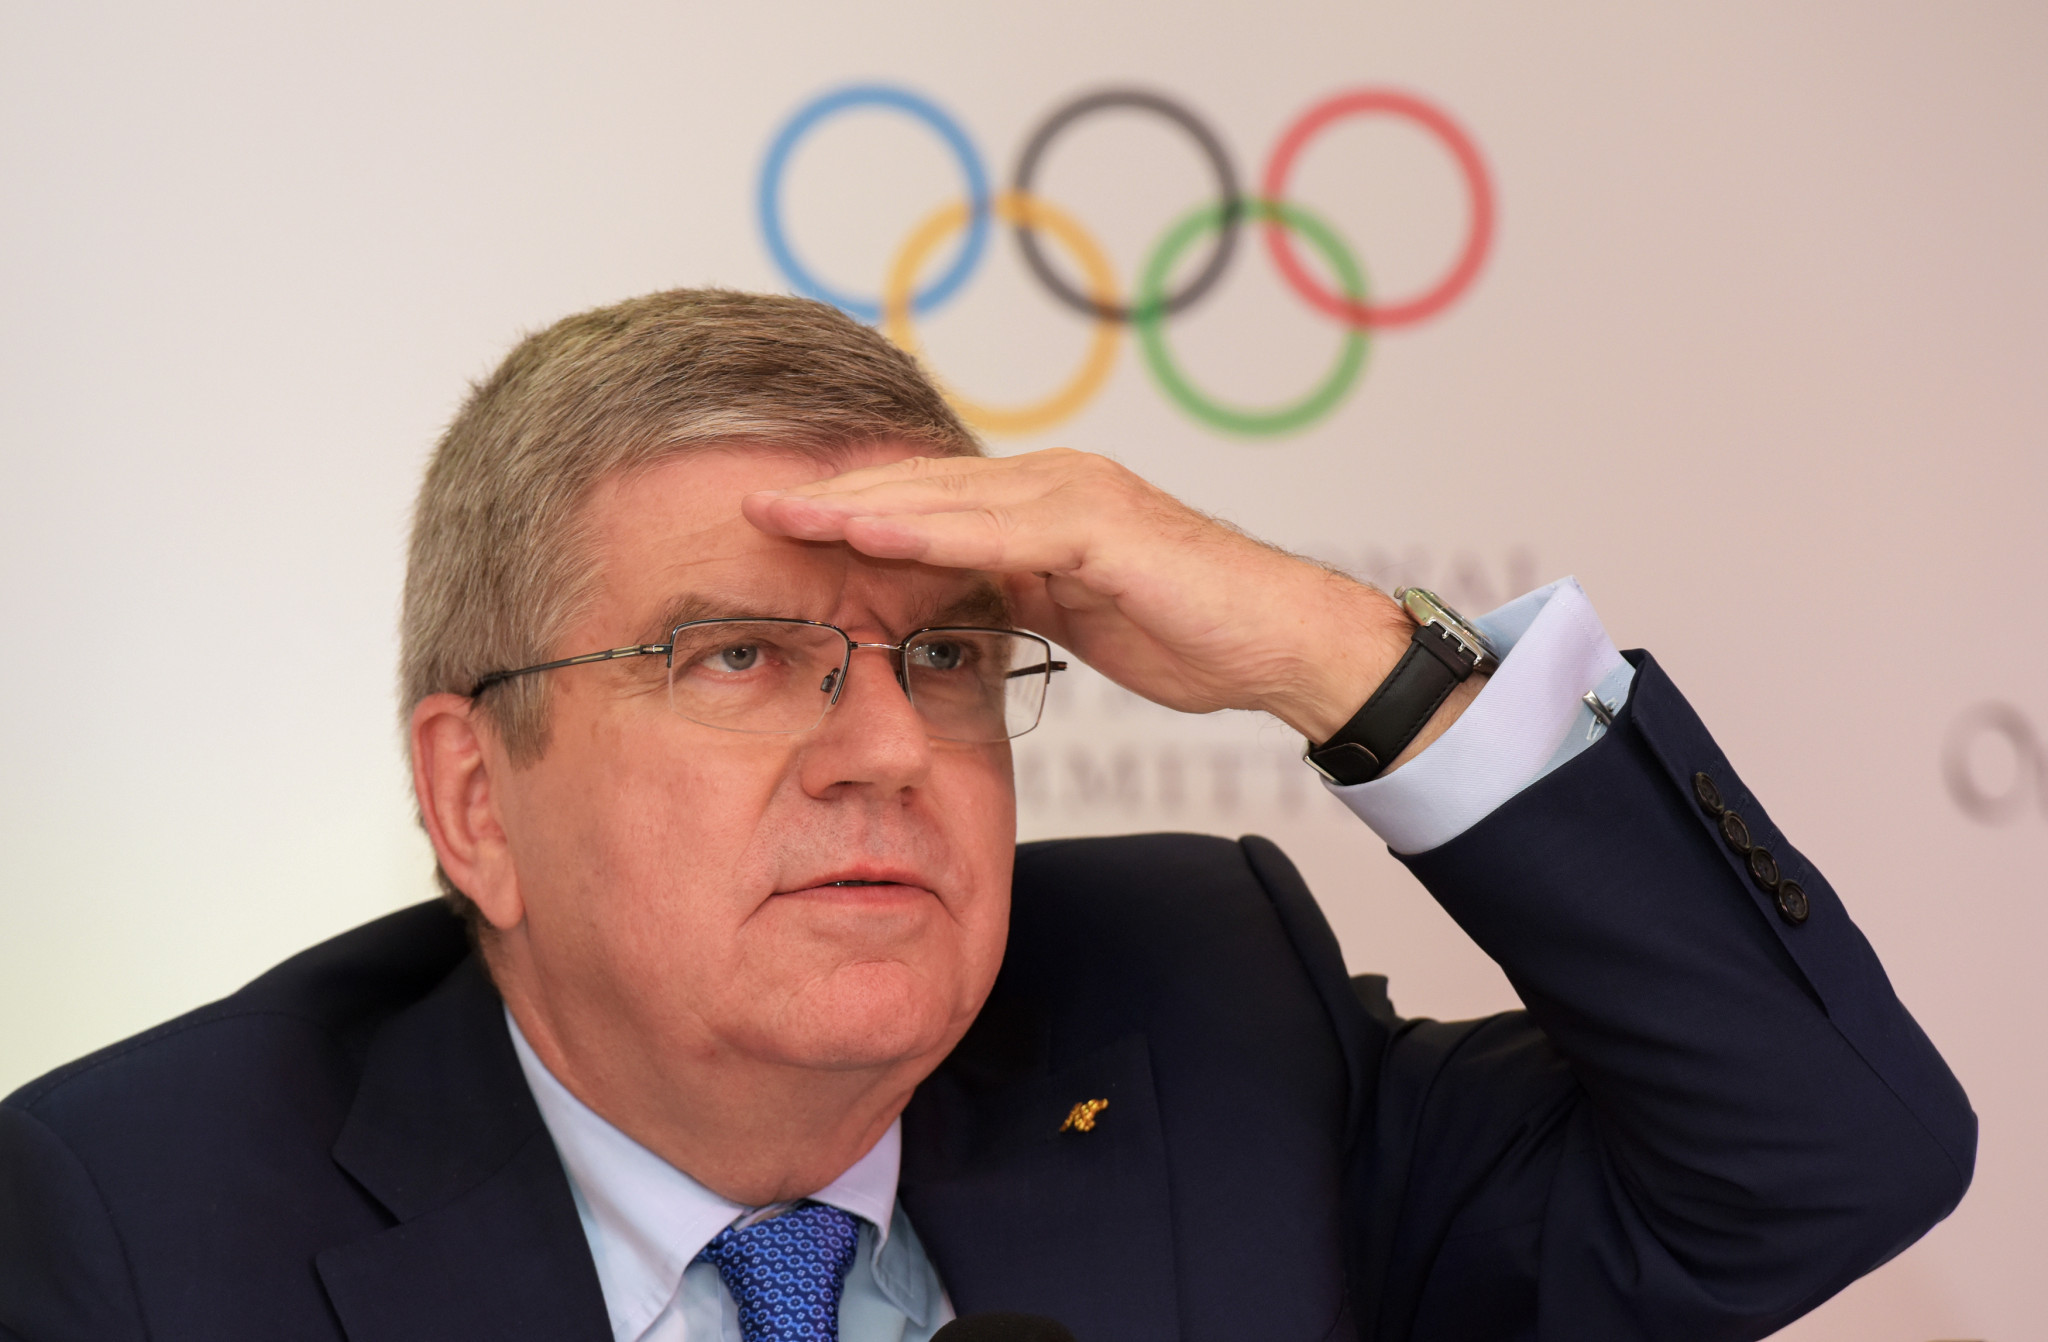 IOC urge AIBA to do more to resolve problems as concerns remain